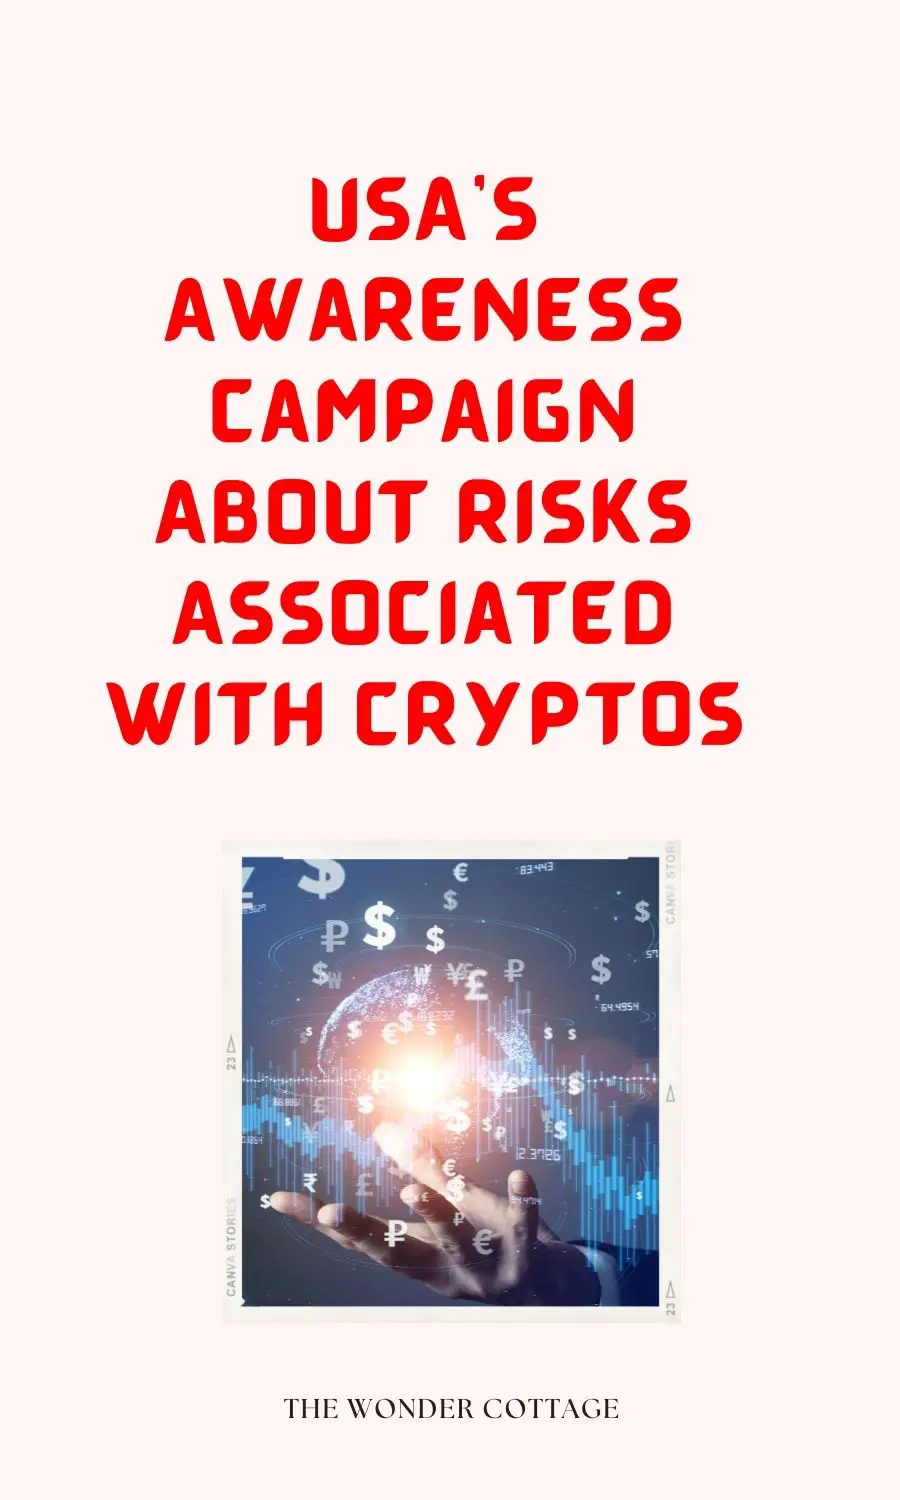 USA’s Awareness Campaign About Risks Associated With Cryptos